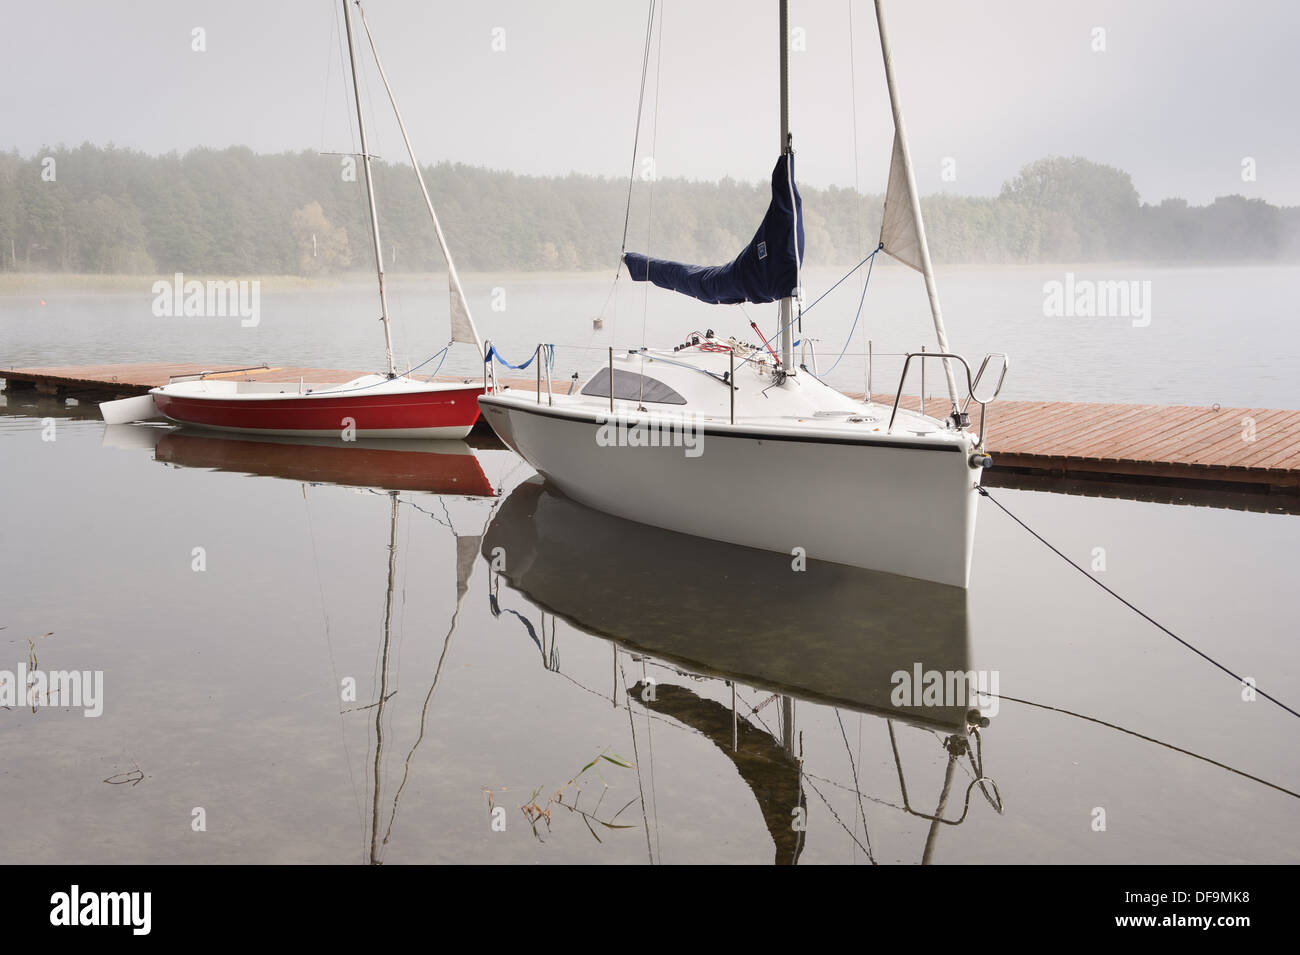 Two boats in fog moored to boardwalk at lake Stock Photo